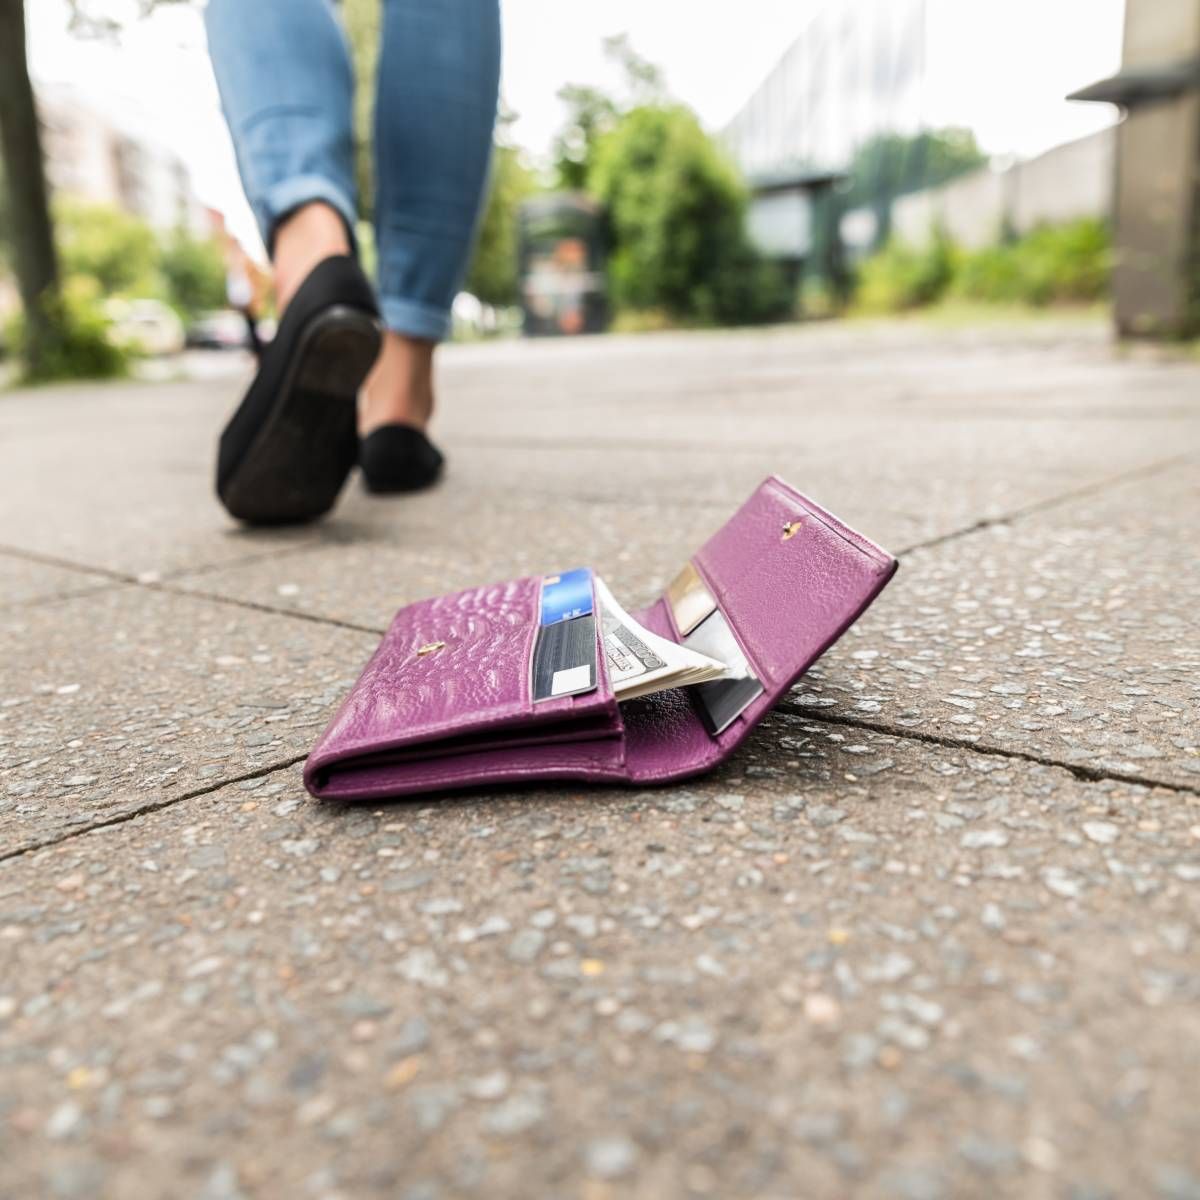 Losing your wallet | Service NSW